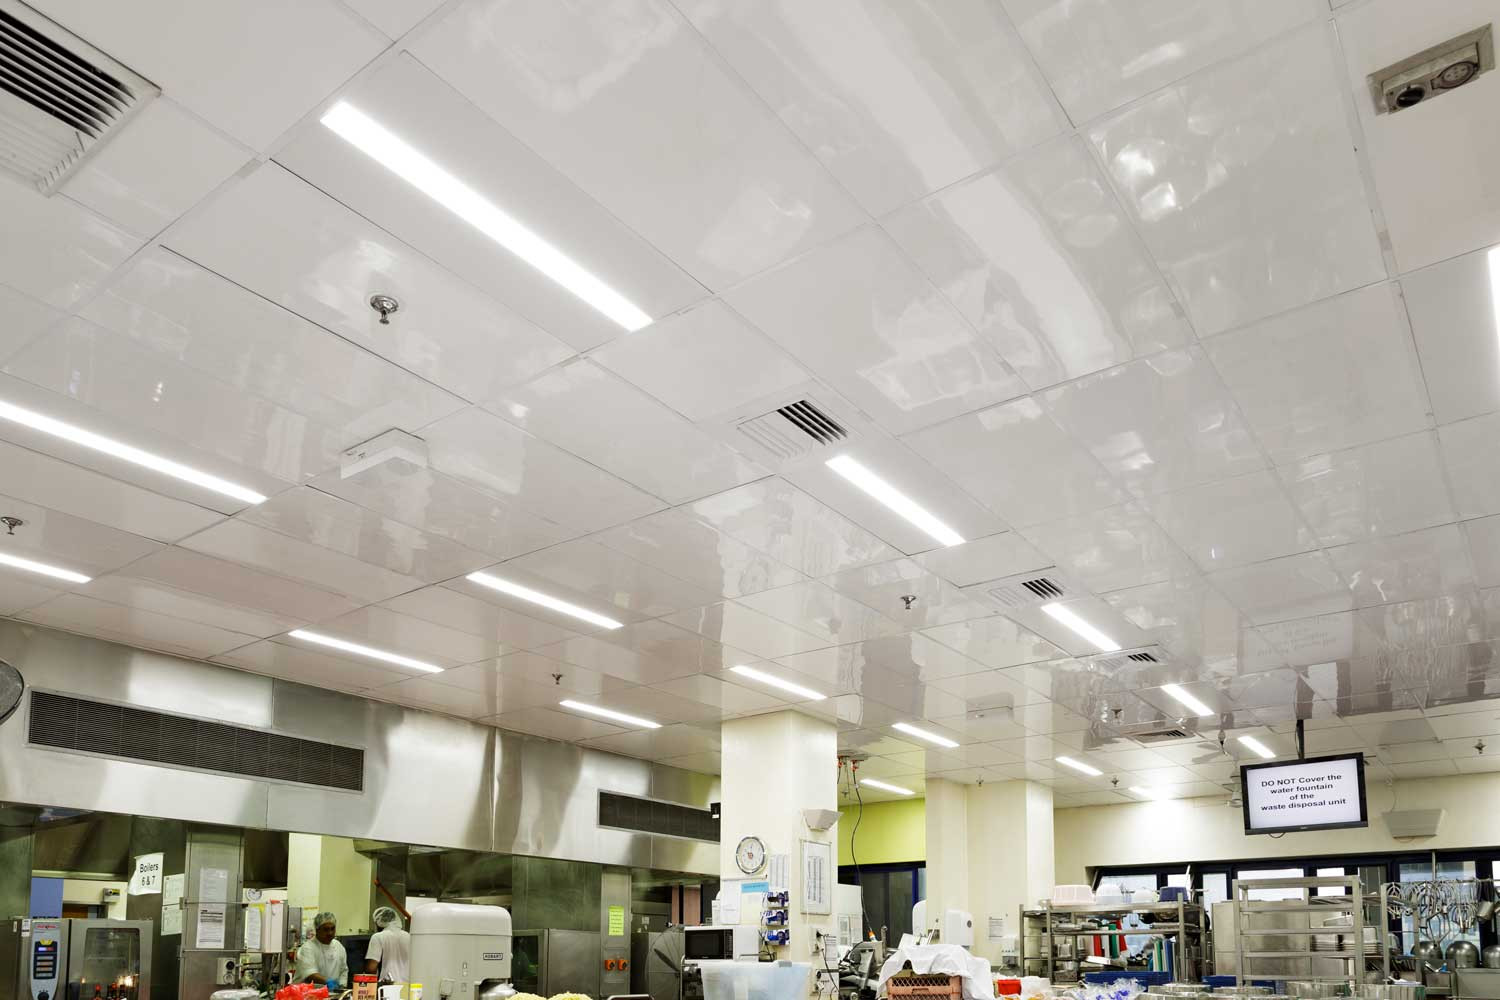 Commercial Kitchen Ceiling Tiles
 mercial Kitchen Ceiling Replaced with Low Maintenance